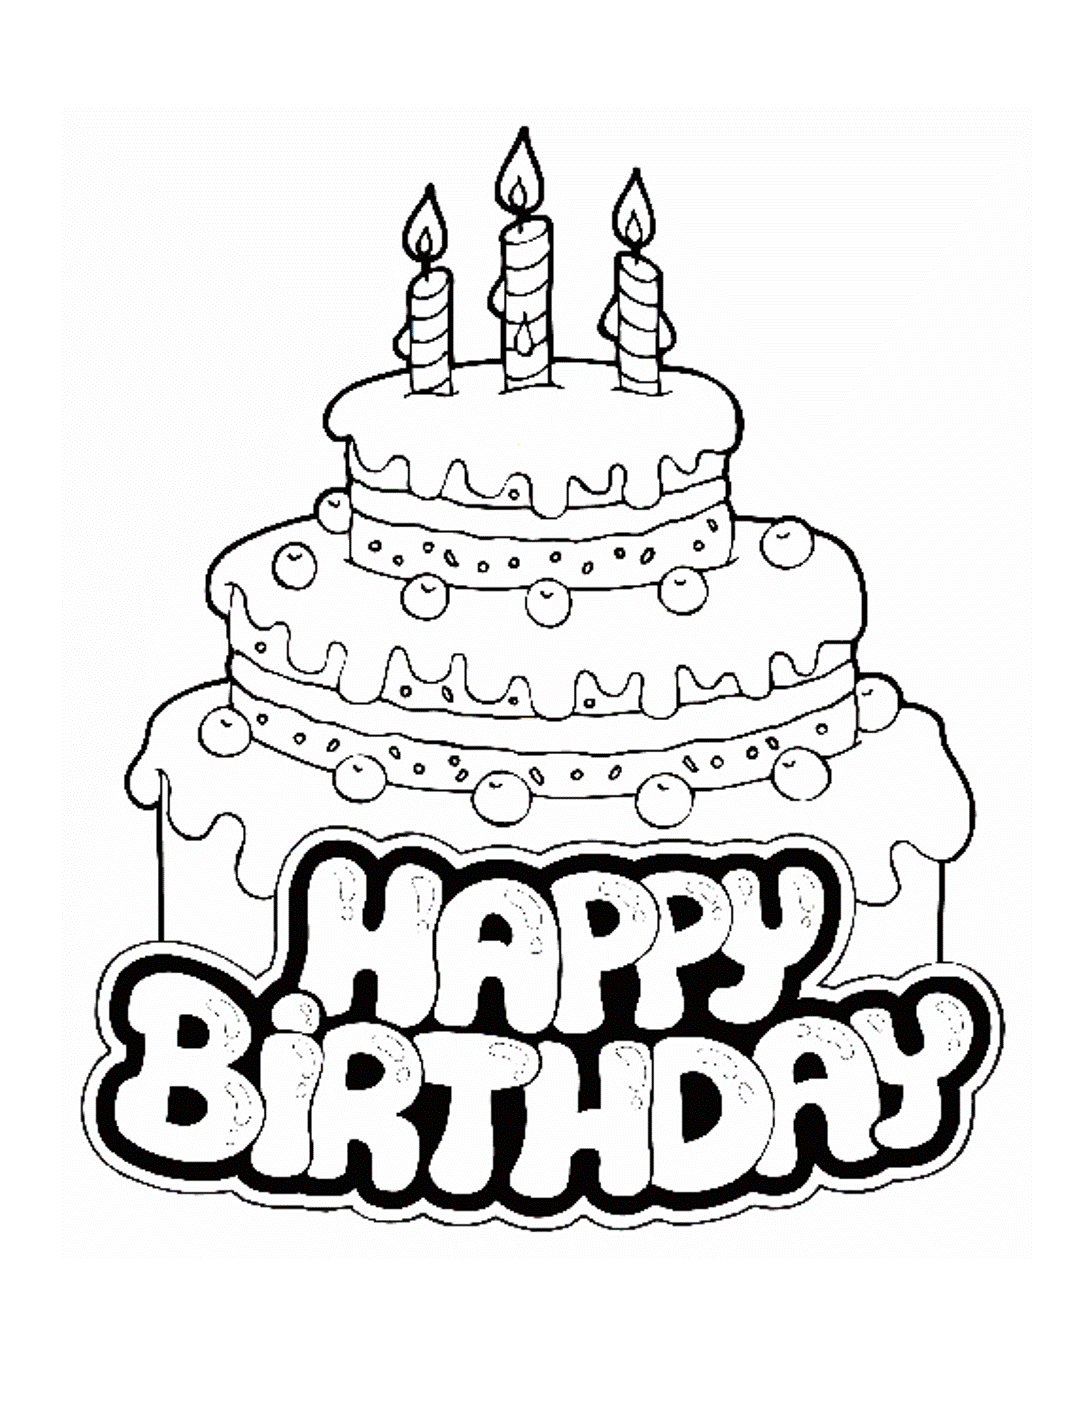 Happy Birthday Coloring Pages | SelfColoringPages.com